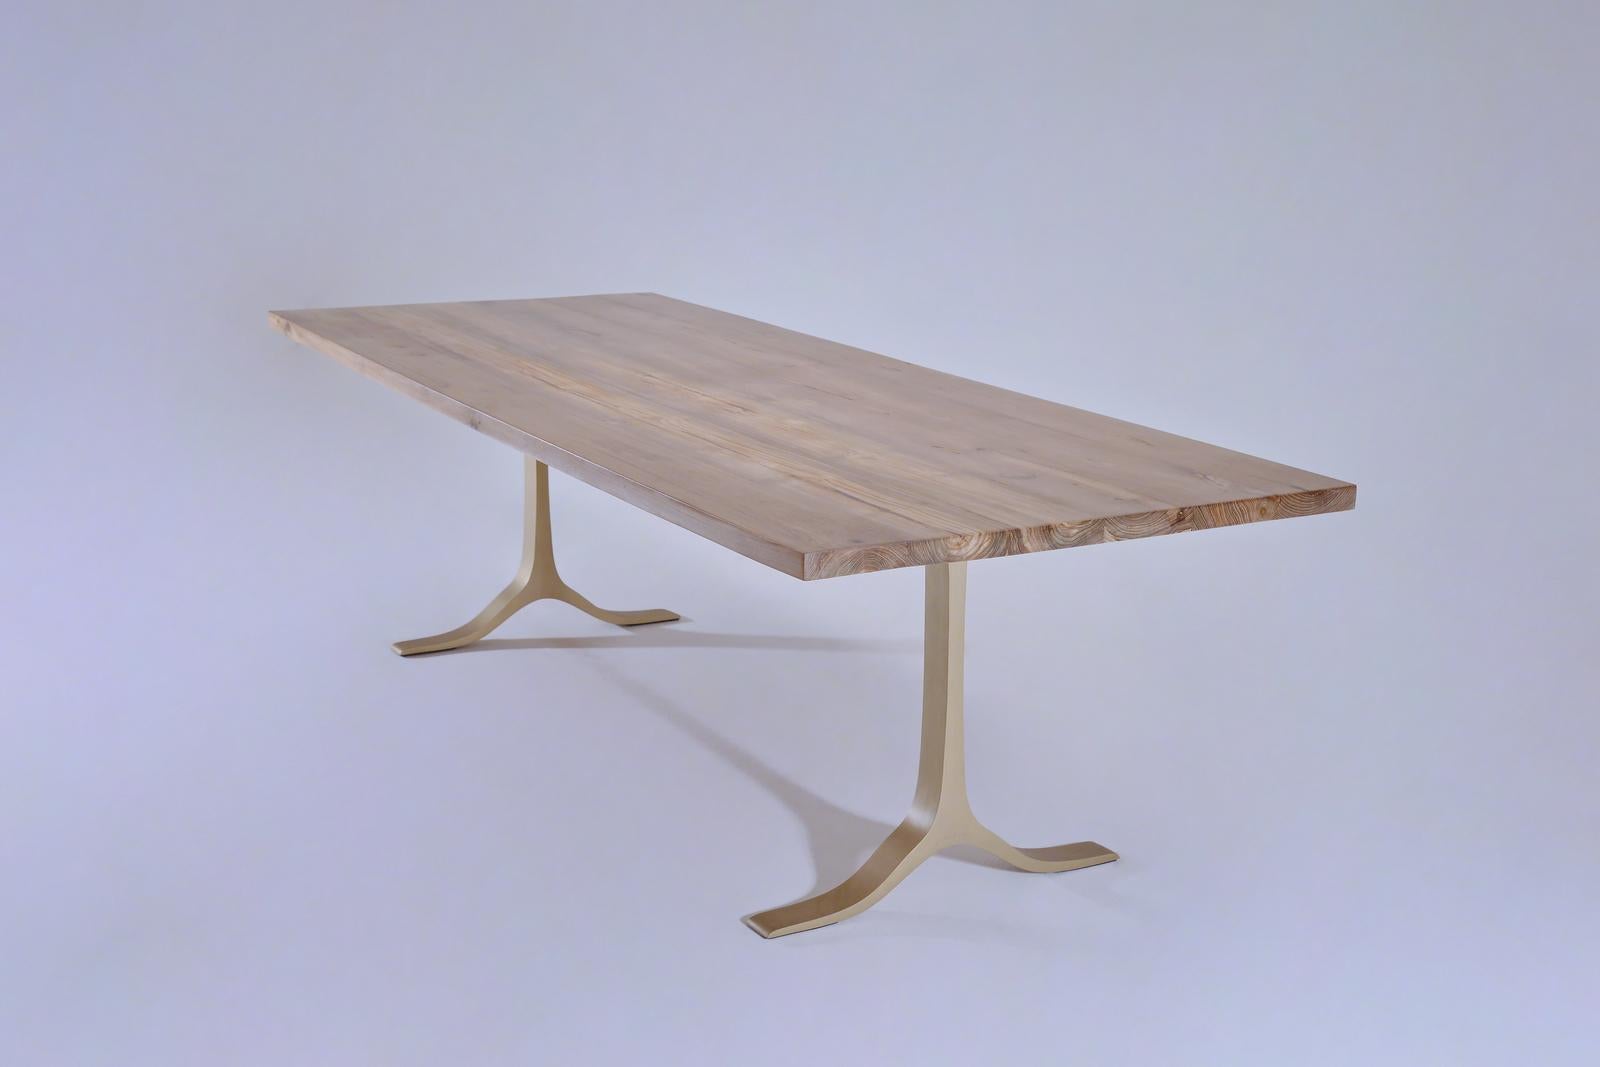 Model: FTOP-PT2L-BS1-TE-BL-NO
Top: Reclaimed hardwood
Top finish: Natural oiled
Base: PT2L base, Golden Sand Brass
Base finish: Sculpture structure natural
Dimensions: 250 x 96 x 73 cm
(W x D x H) inches 98.43 x 37.8 x 28.74 inch

P. Tendercool